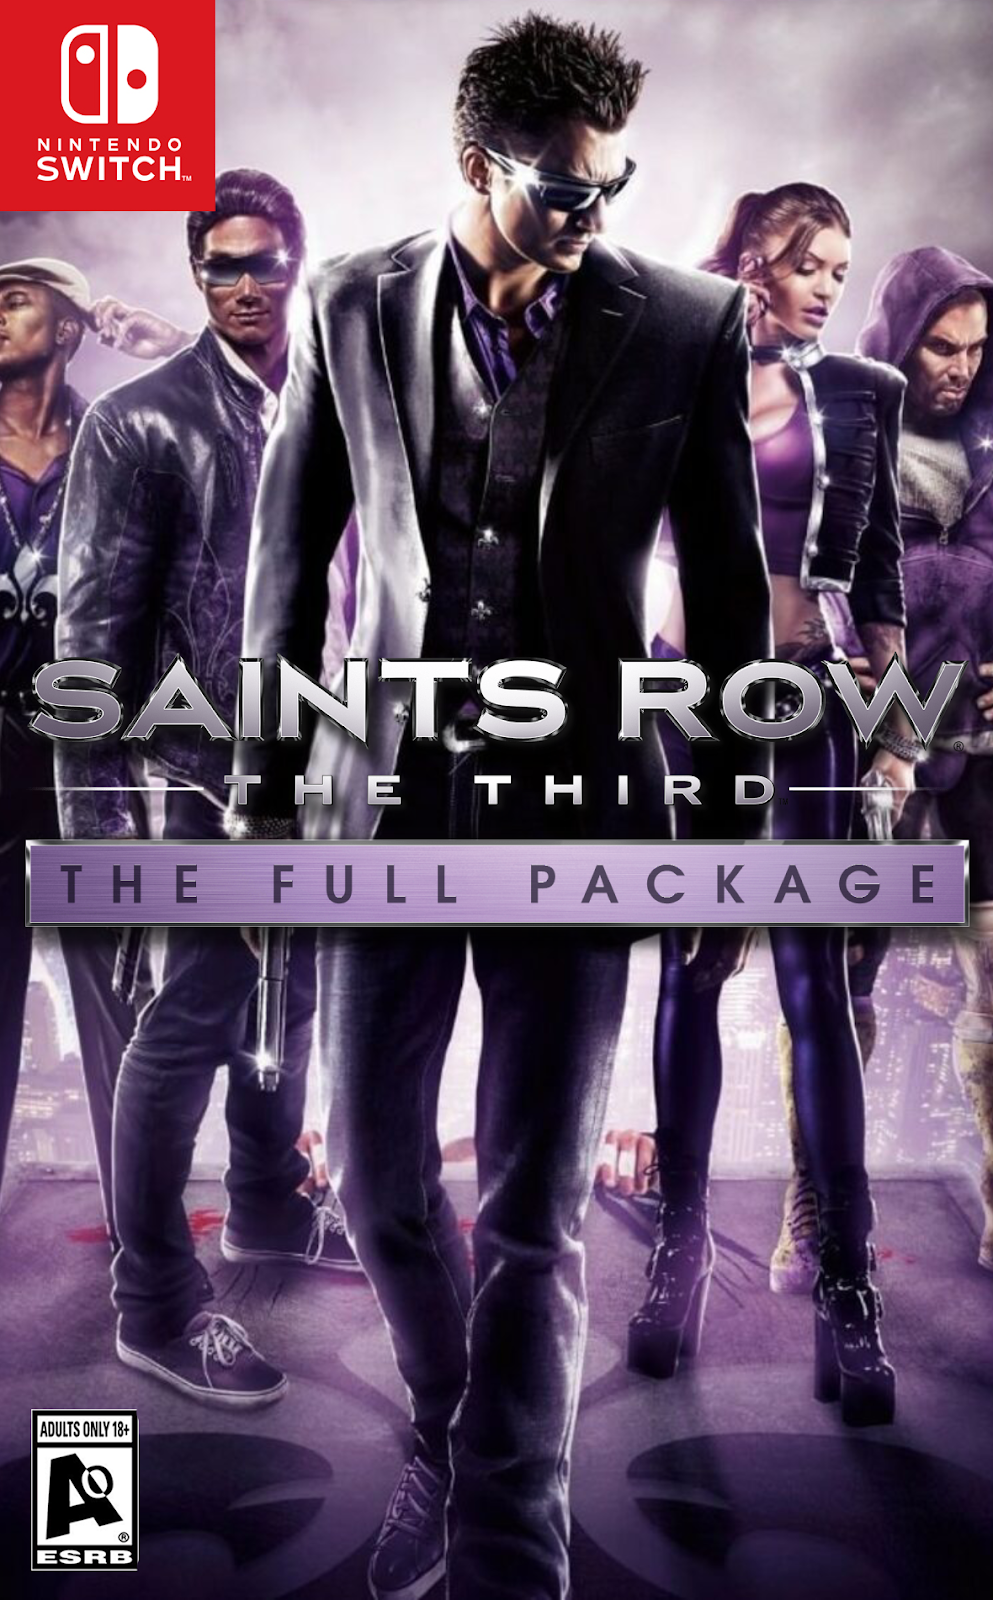 Saint's Row: The Third – The Full Package - Cover Art